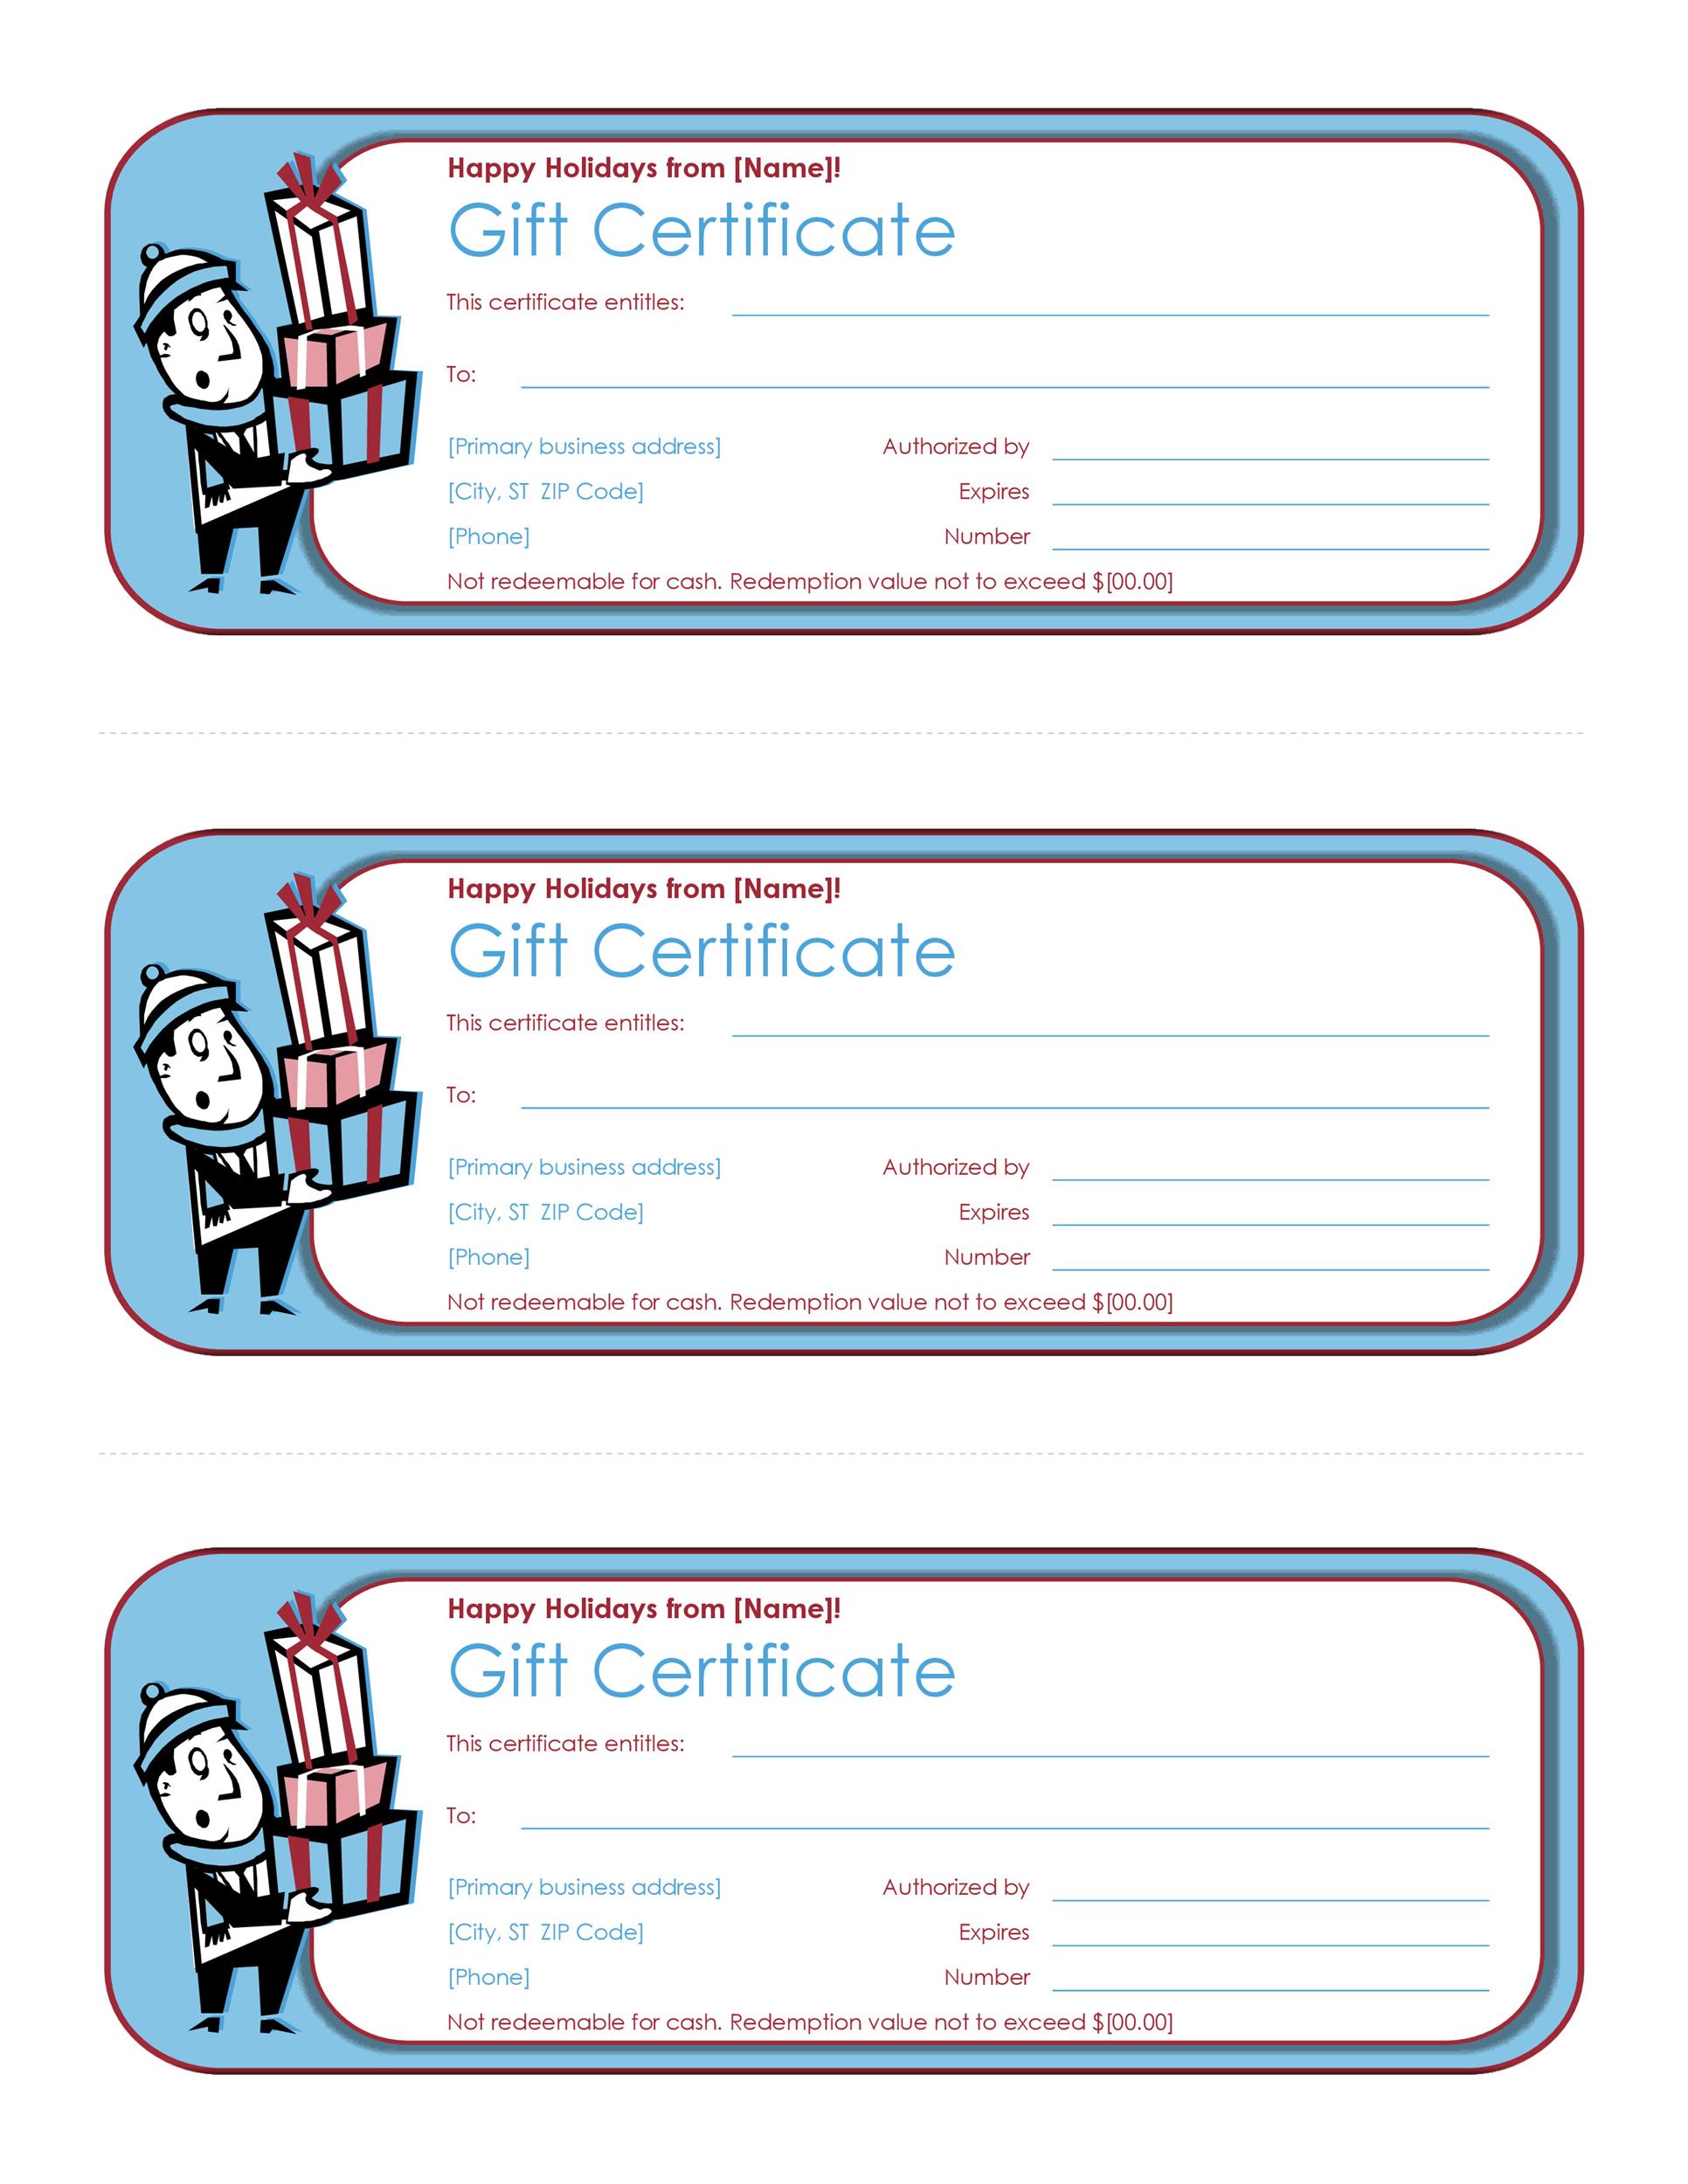 free-gift-certificate-template-customizable